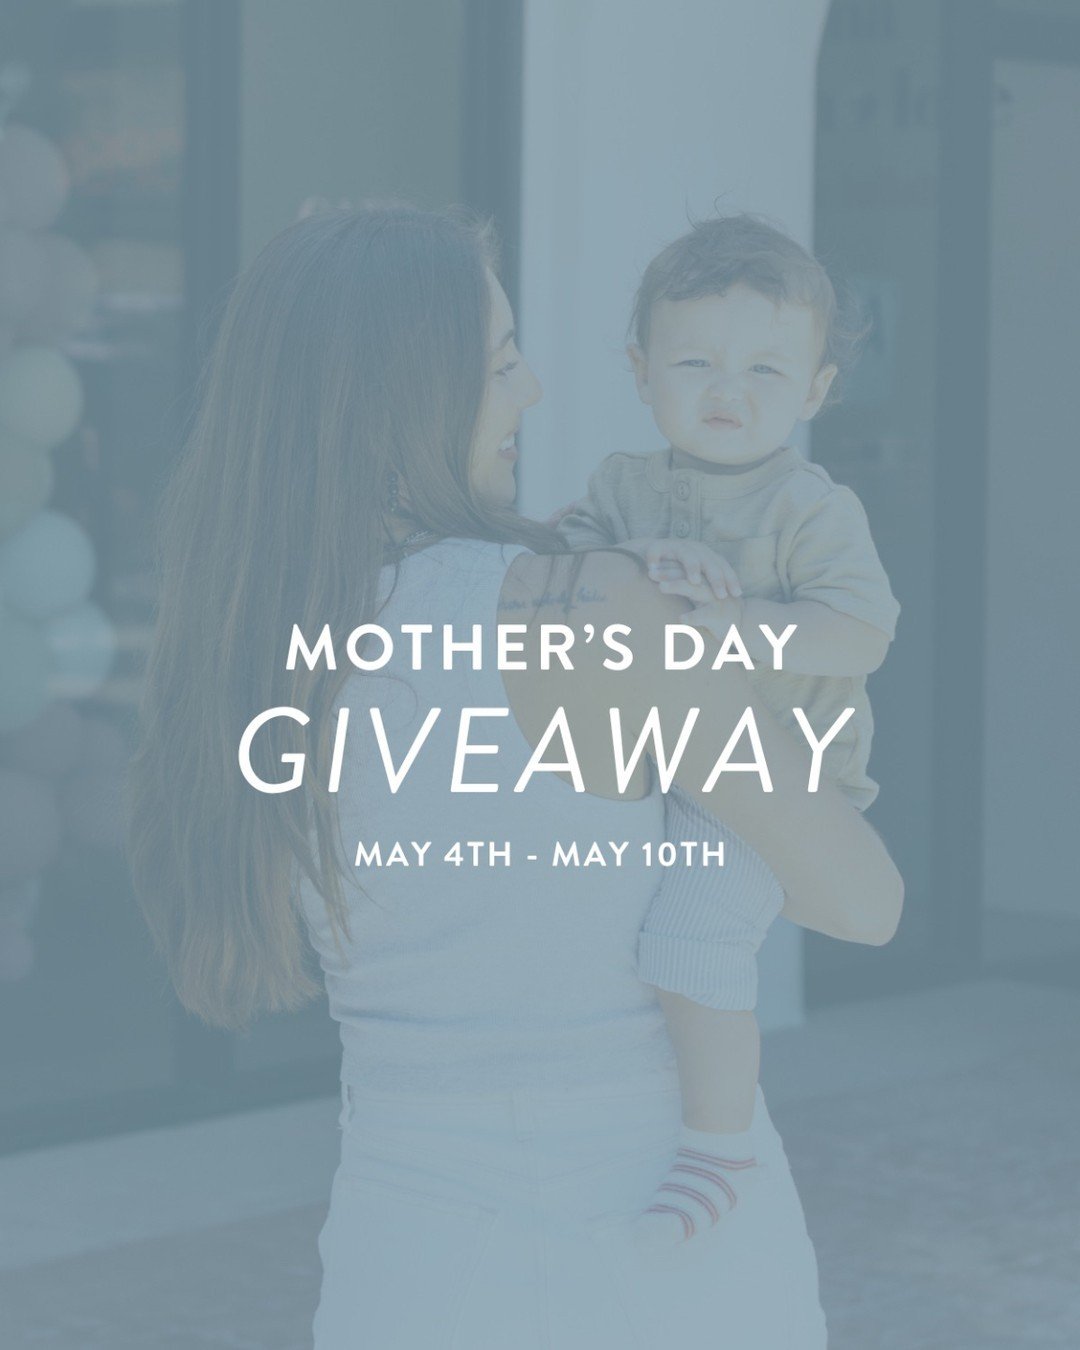 Celebrate Mom with our Ultimate Mother's Day Giveaway! ✨🌼 

Win a bundle of treats from some of our lovely tenants at The Beacon: a candle pouring workshop from @paddywaxcandlebar, @lacostawine gift card, @shout.and.about gift basket, @fuzejewelry g